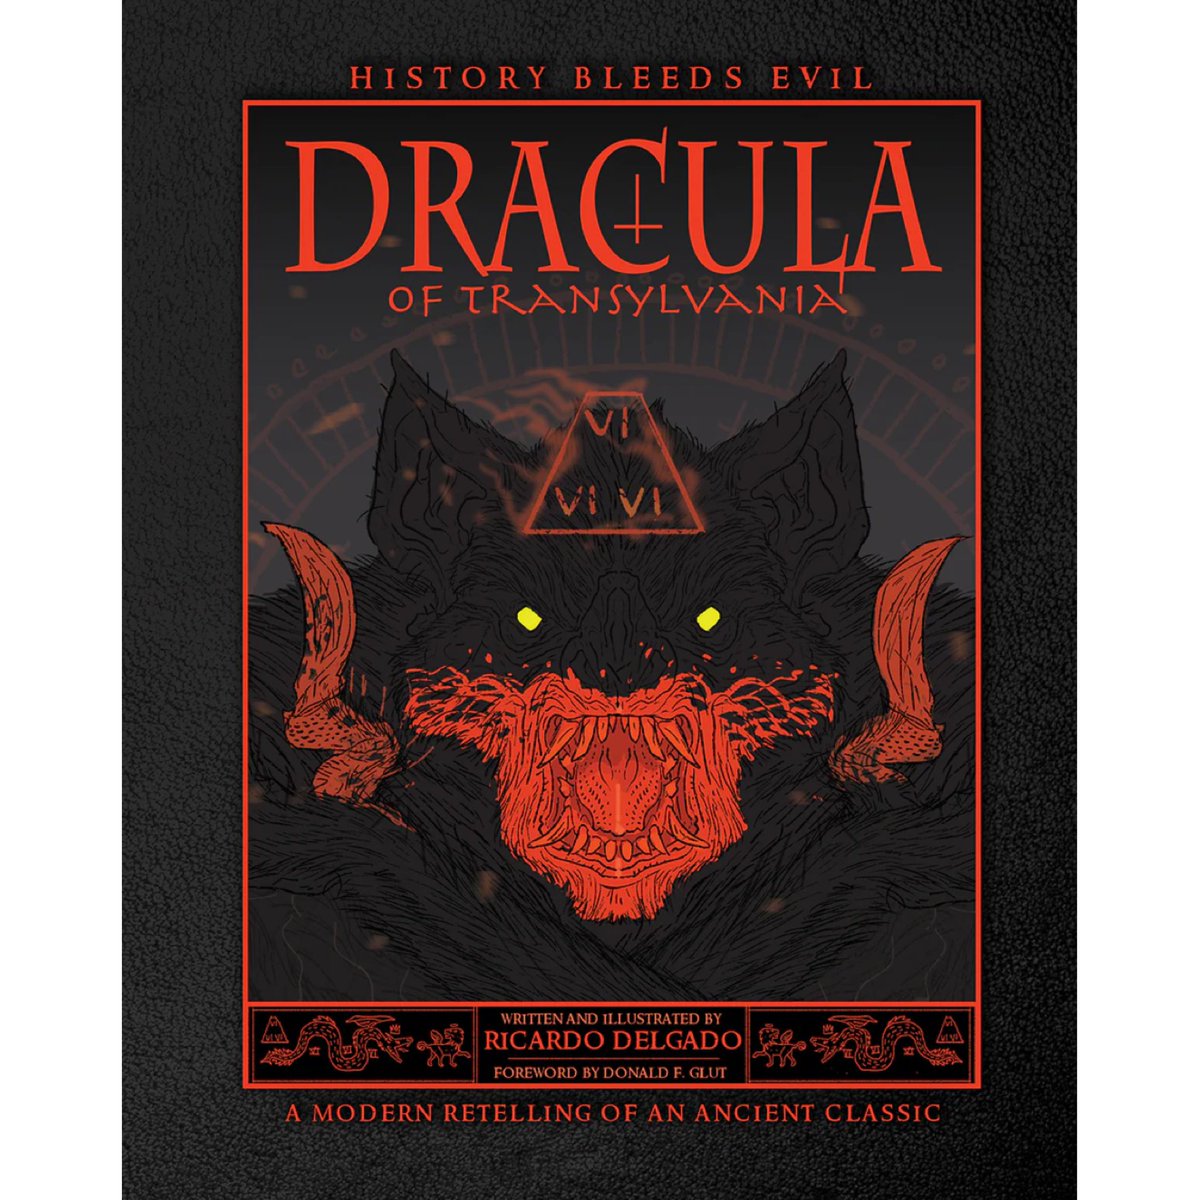 Today is World Dracula Day, and we sure love Dracula over here at the Clover offices! Do a search for Dracula over at cloverpress.us and see what comes up!

#dracula #belalugosi #worlddraculaday #draculaoftransylvania #cloverpress